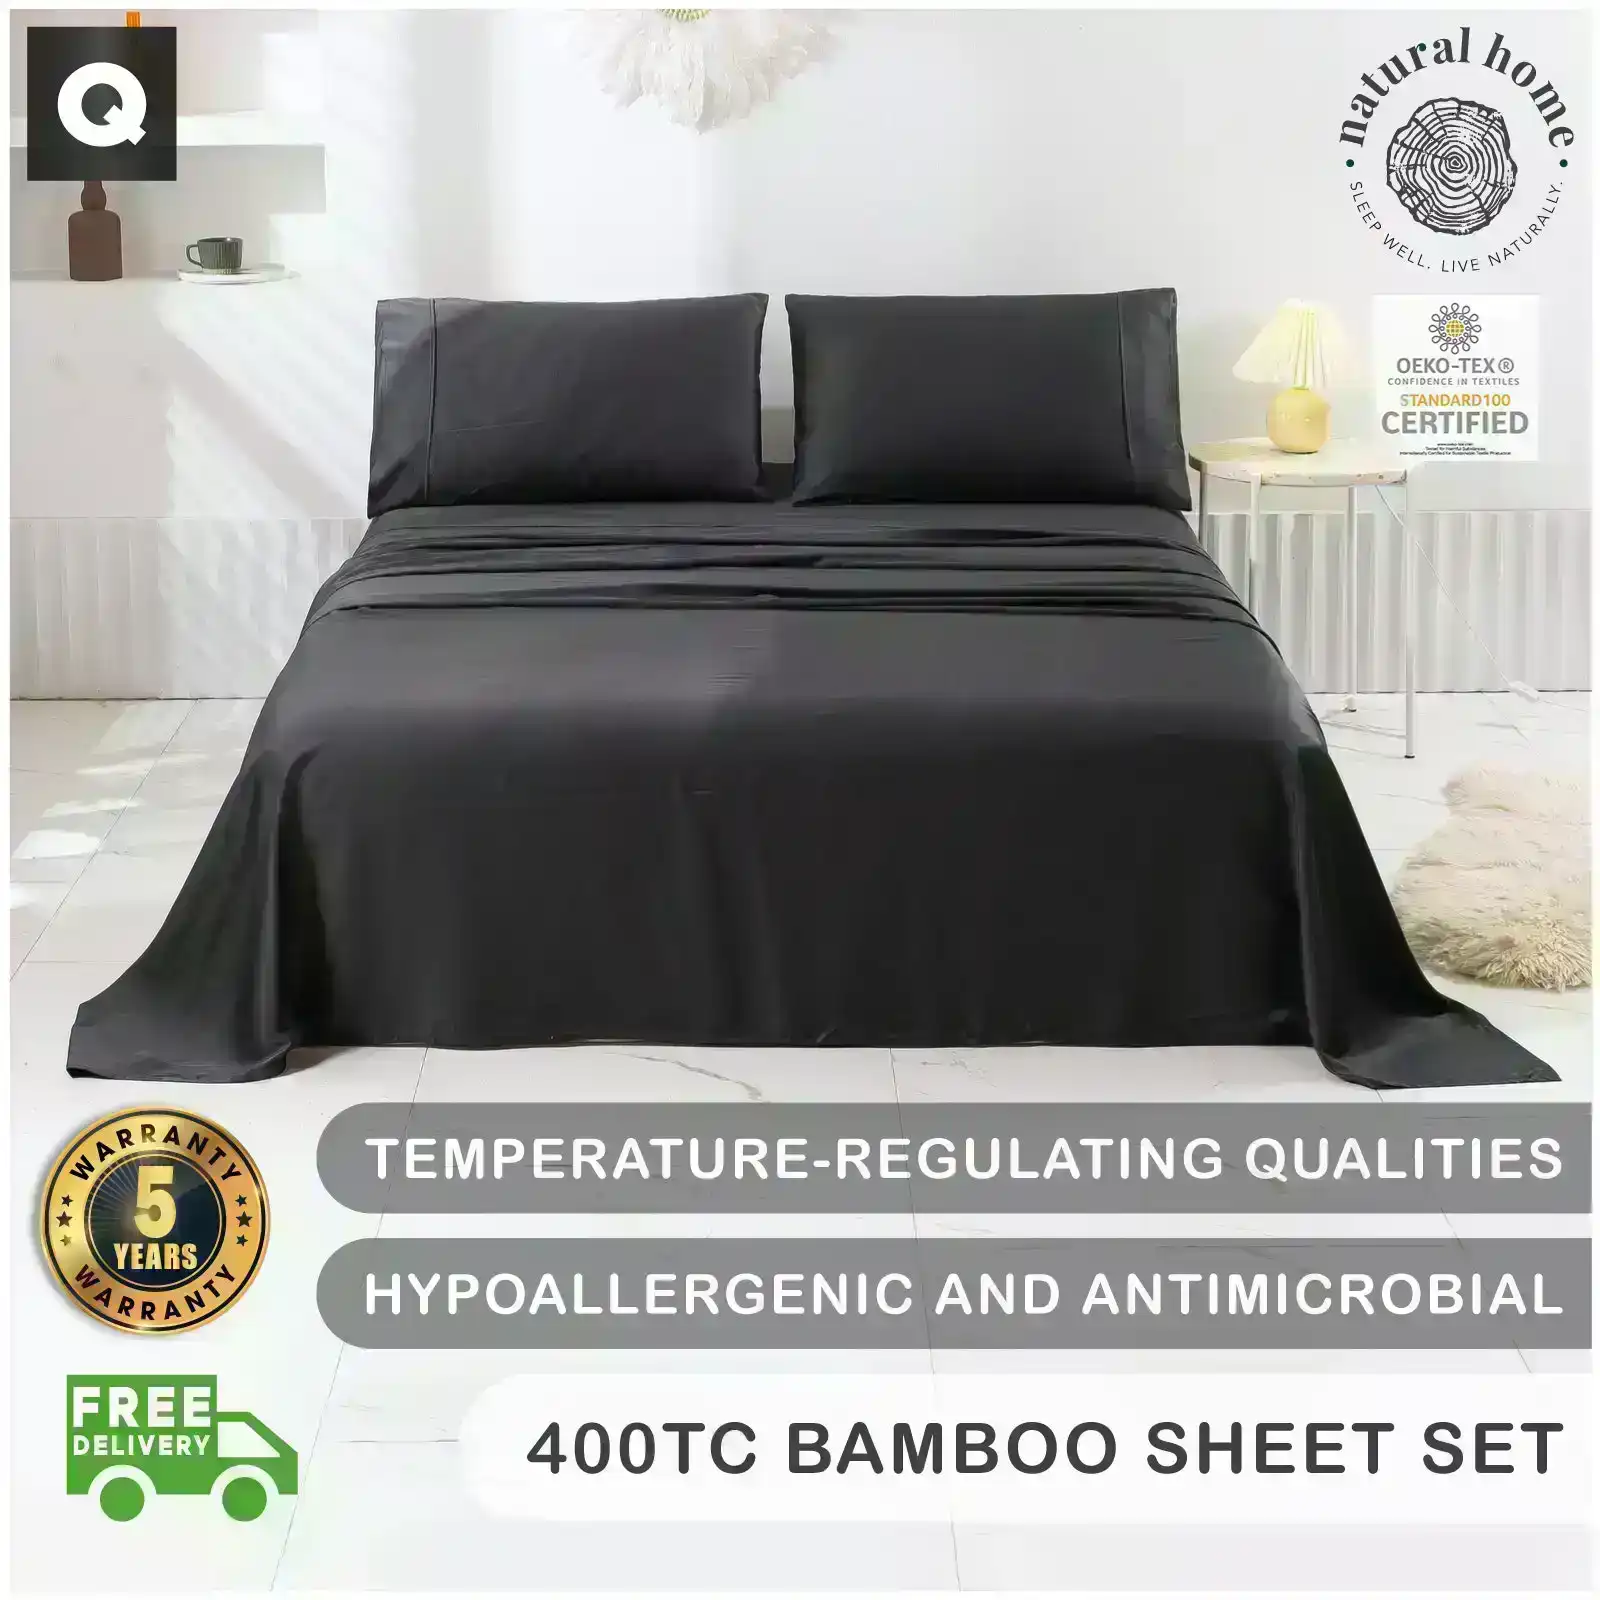 Natural Home Bamboo Sheet Set Charcoal Queen Bed